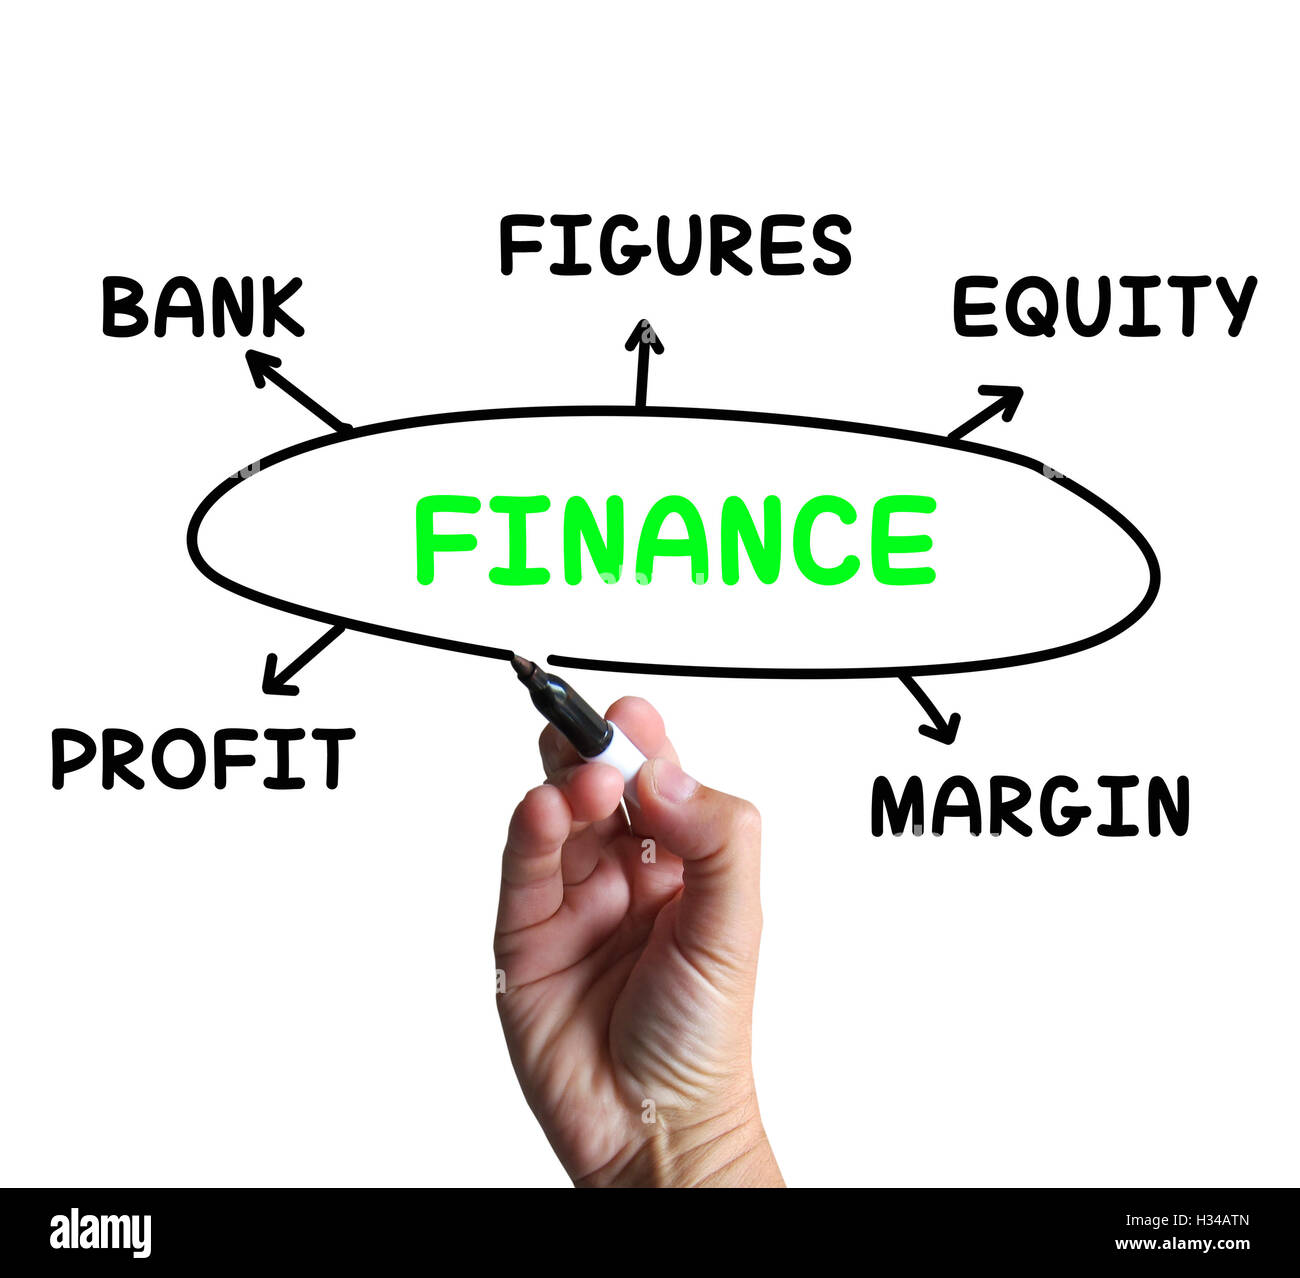 Finance Diagram Means Figures Equity And Profit Stock Photo